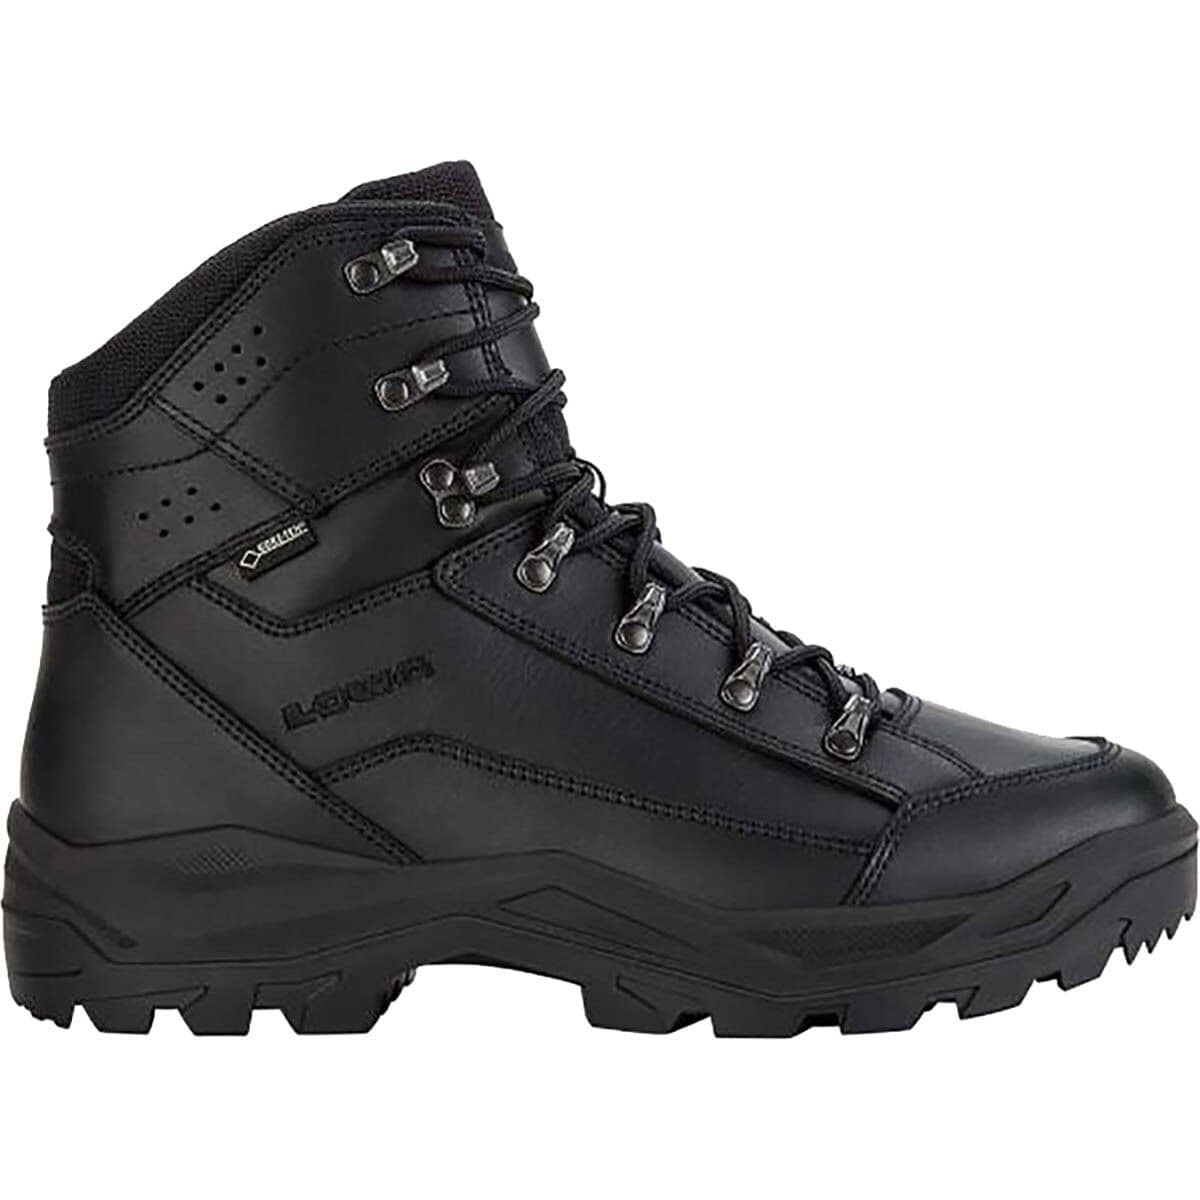 Renegade II GTX Mid TF Hiking - Women's by US-Parks.com